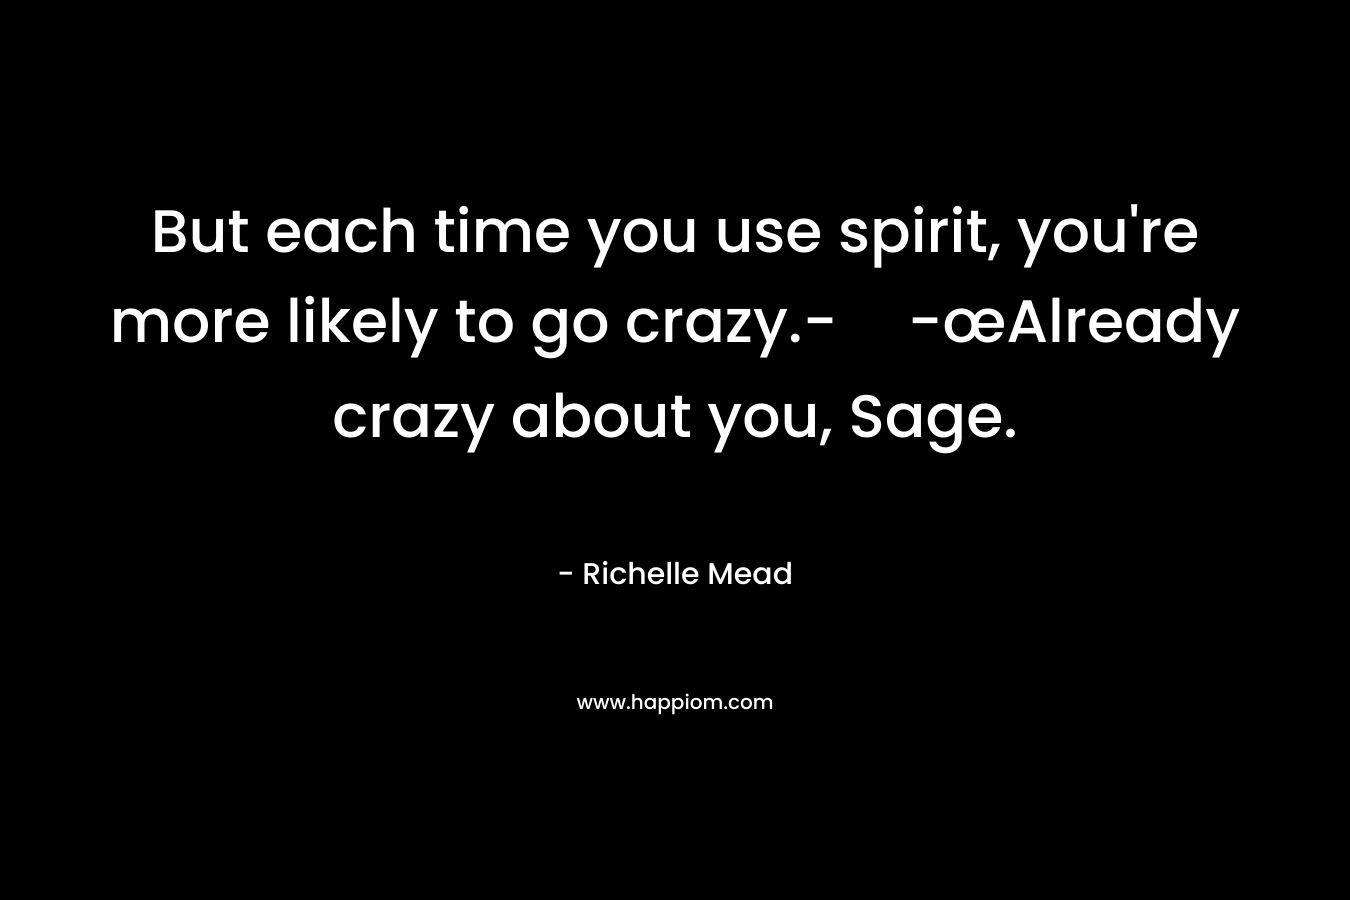 But each time you use spirit, you’re more likely to go crazy.--œAlready crazy about you, Sage. – Richelle Mead